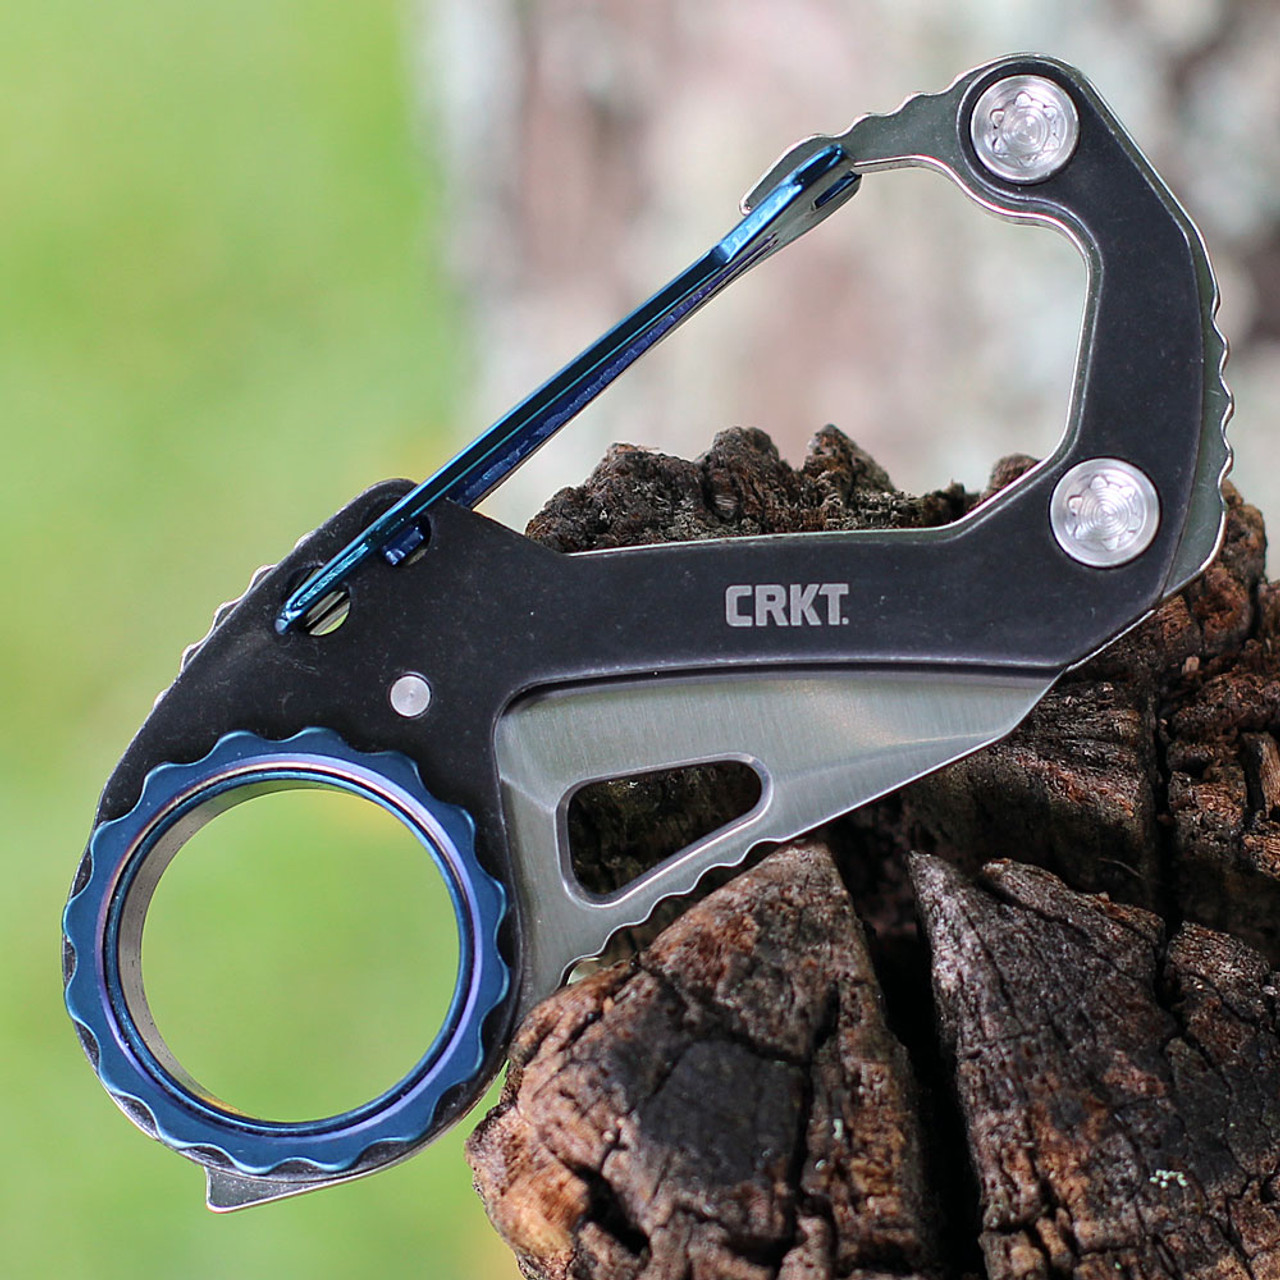 CRKT Compano Carabiner Folding Knife (9083) 1.44" Satin Sheepsfoot Plain Blade, Black Stainless Steel W/ Blue Accents Handle